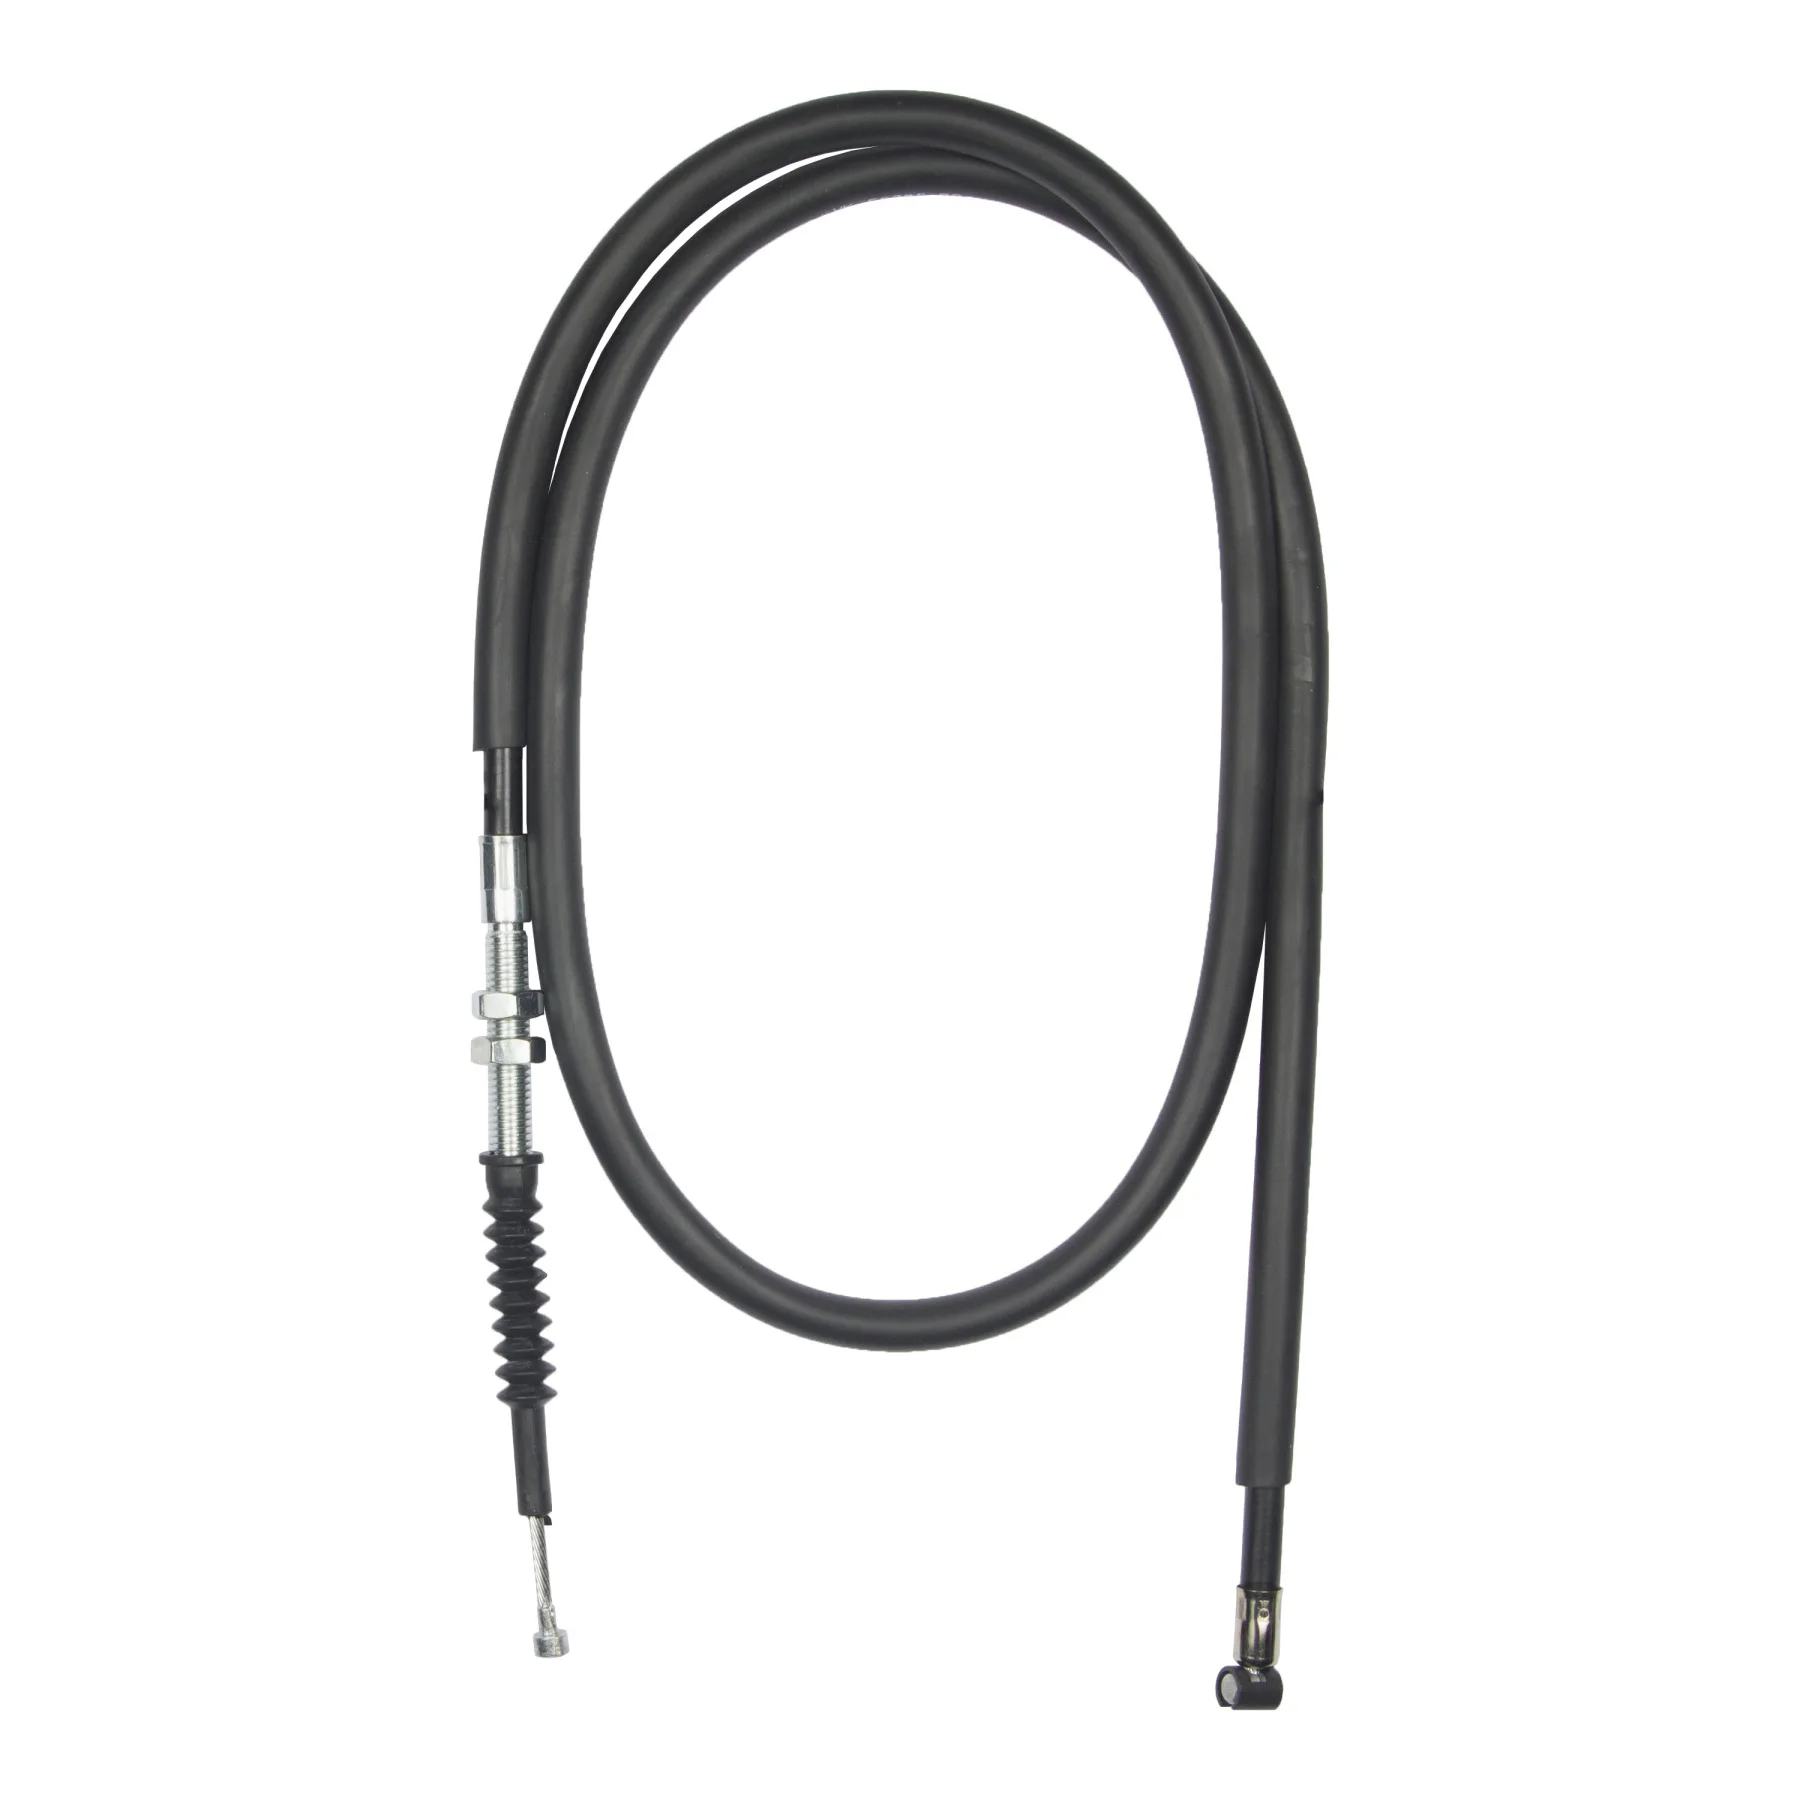 

MotoMaster 5VK-F6335-00 Clutch Cables for Yamaha XT 660 ZA Tenere ABS (2011-2014)